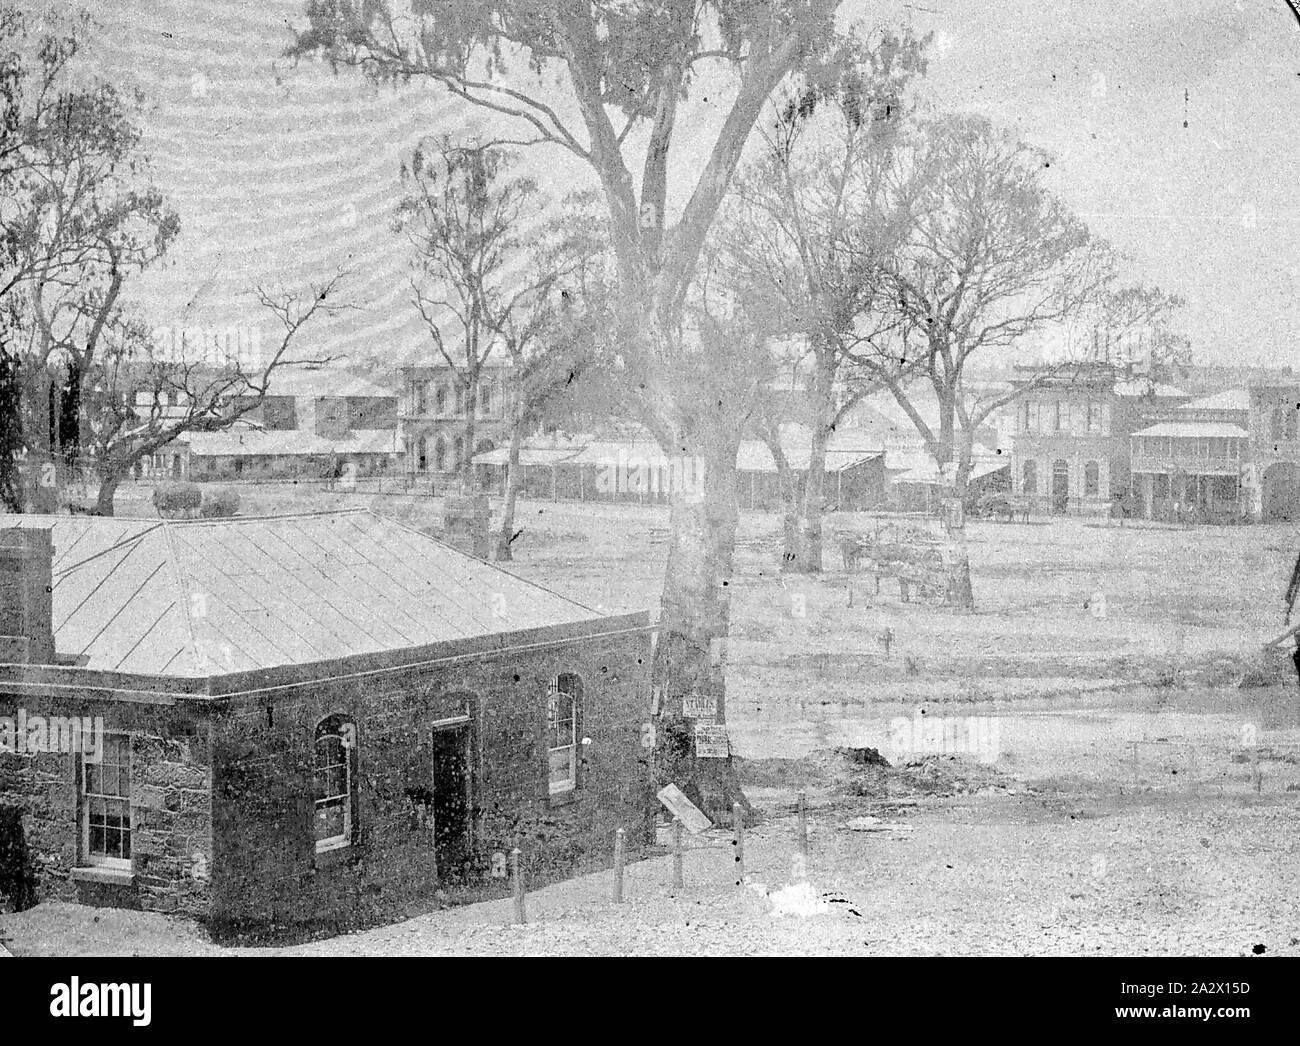 Negative - Bendigo, Victoria, 1857, There is a stone cottage in the foreground and the Bendigo Creek behind it. The Bendigo Hotel is among the buildings in the background Stock Photo